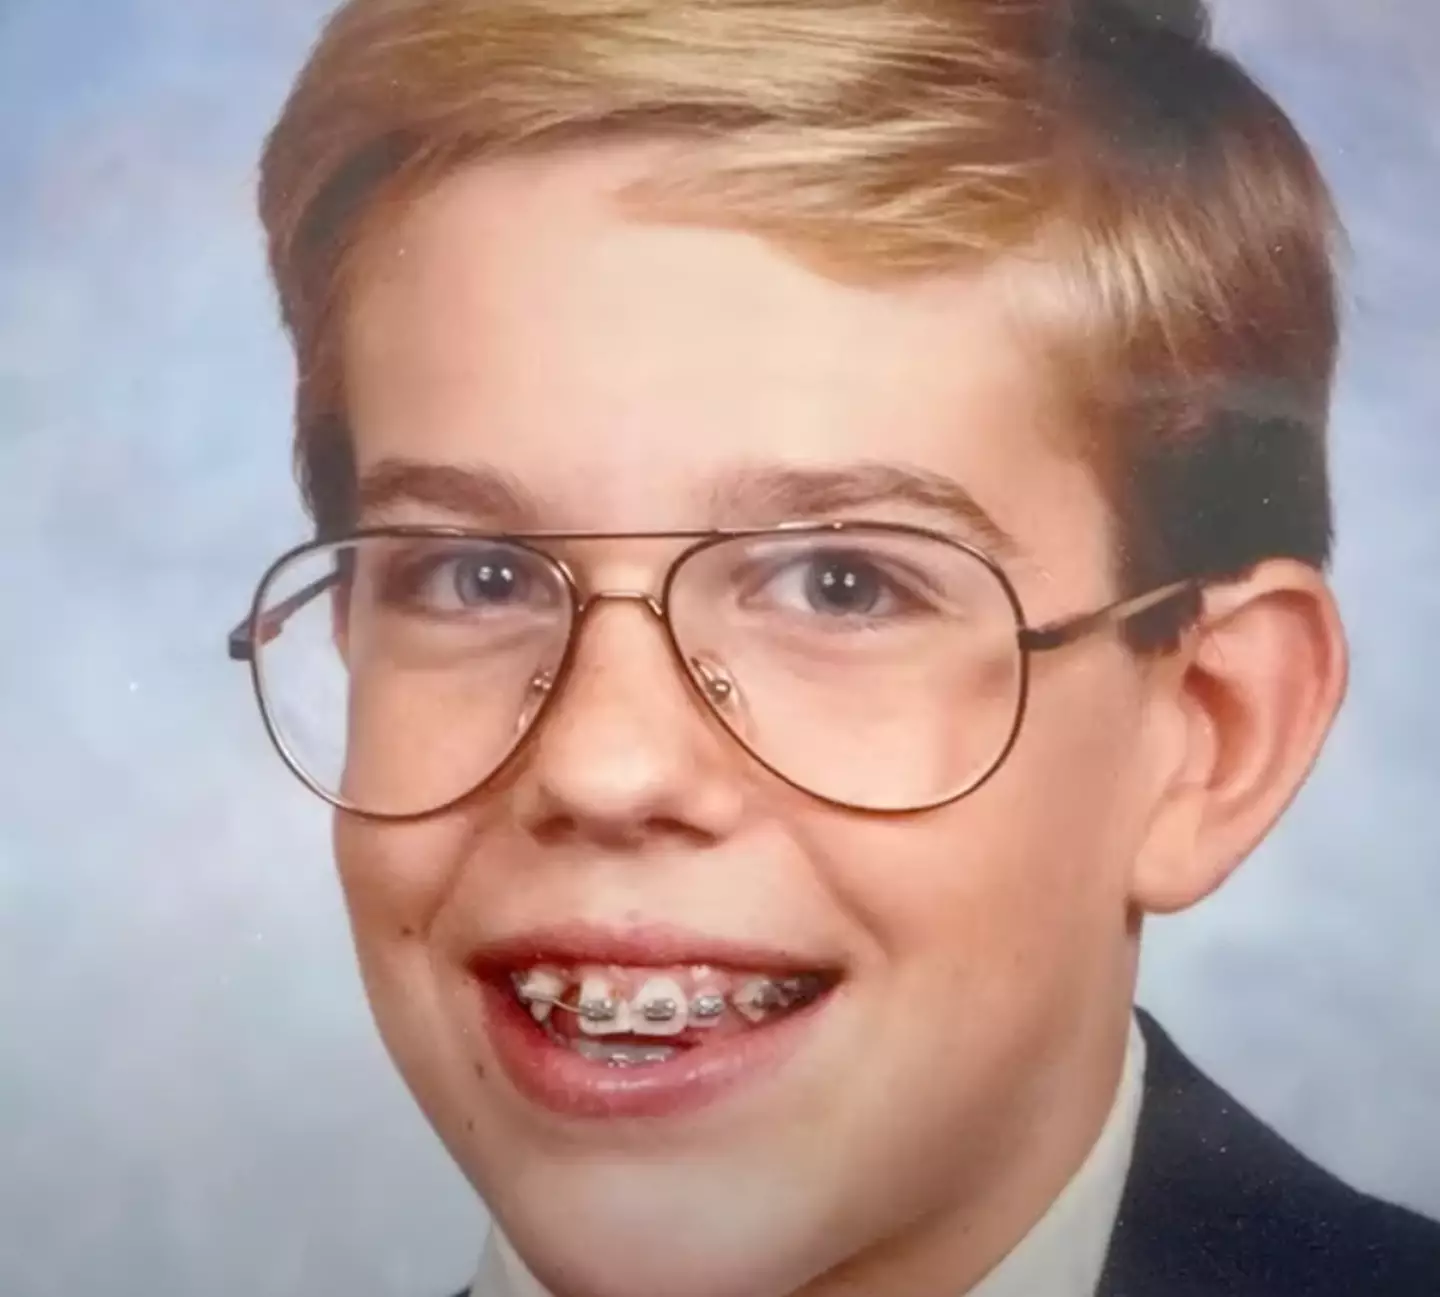 Ed Helms explained he never had a tooth in that spot.